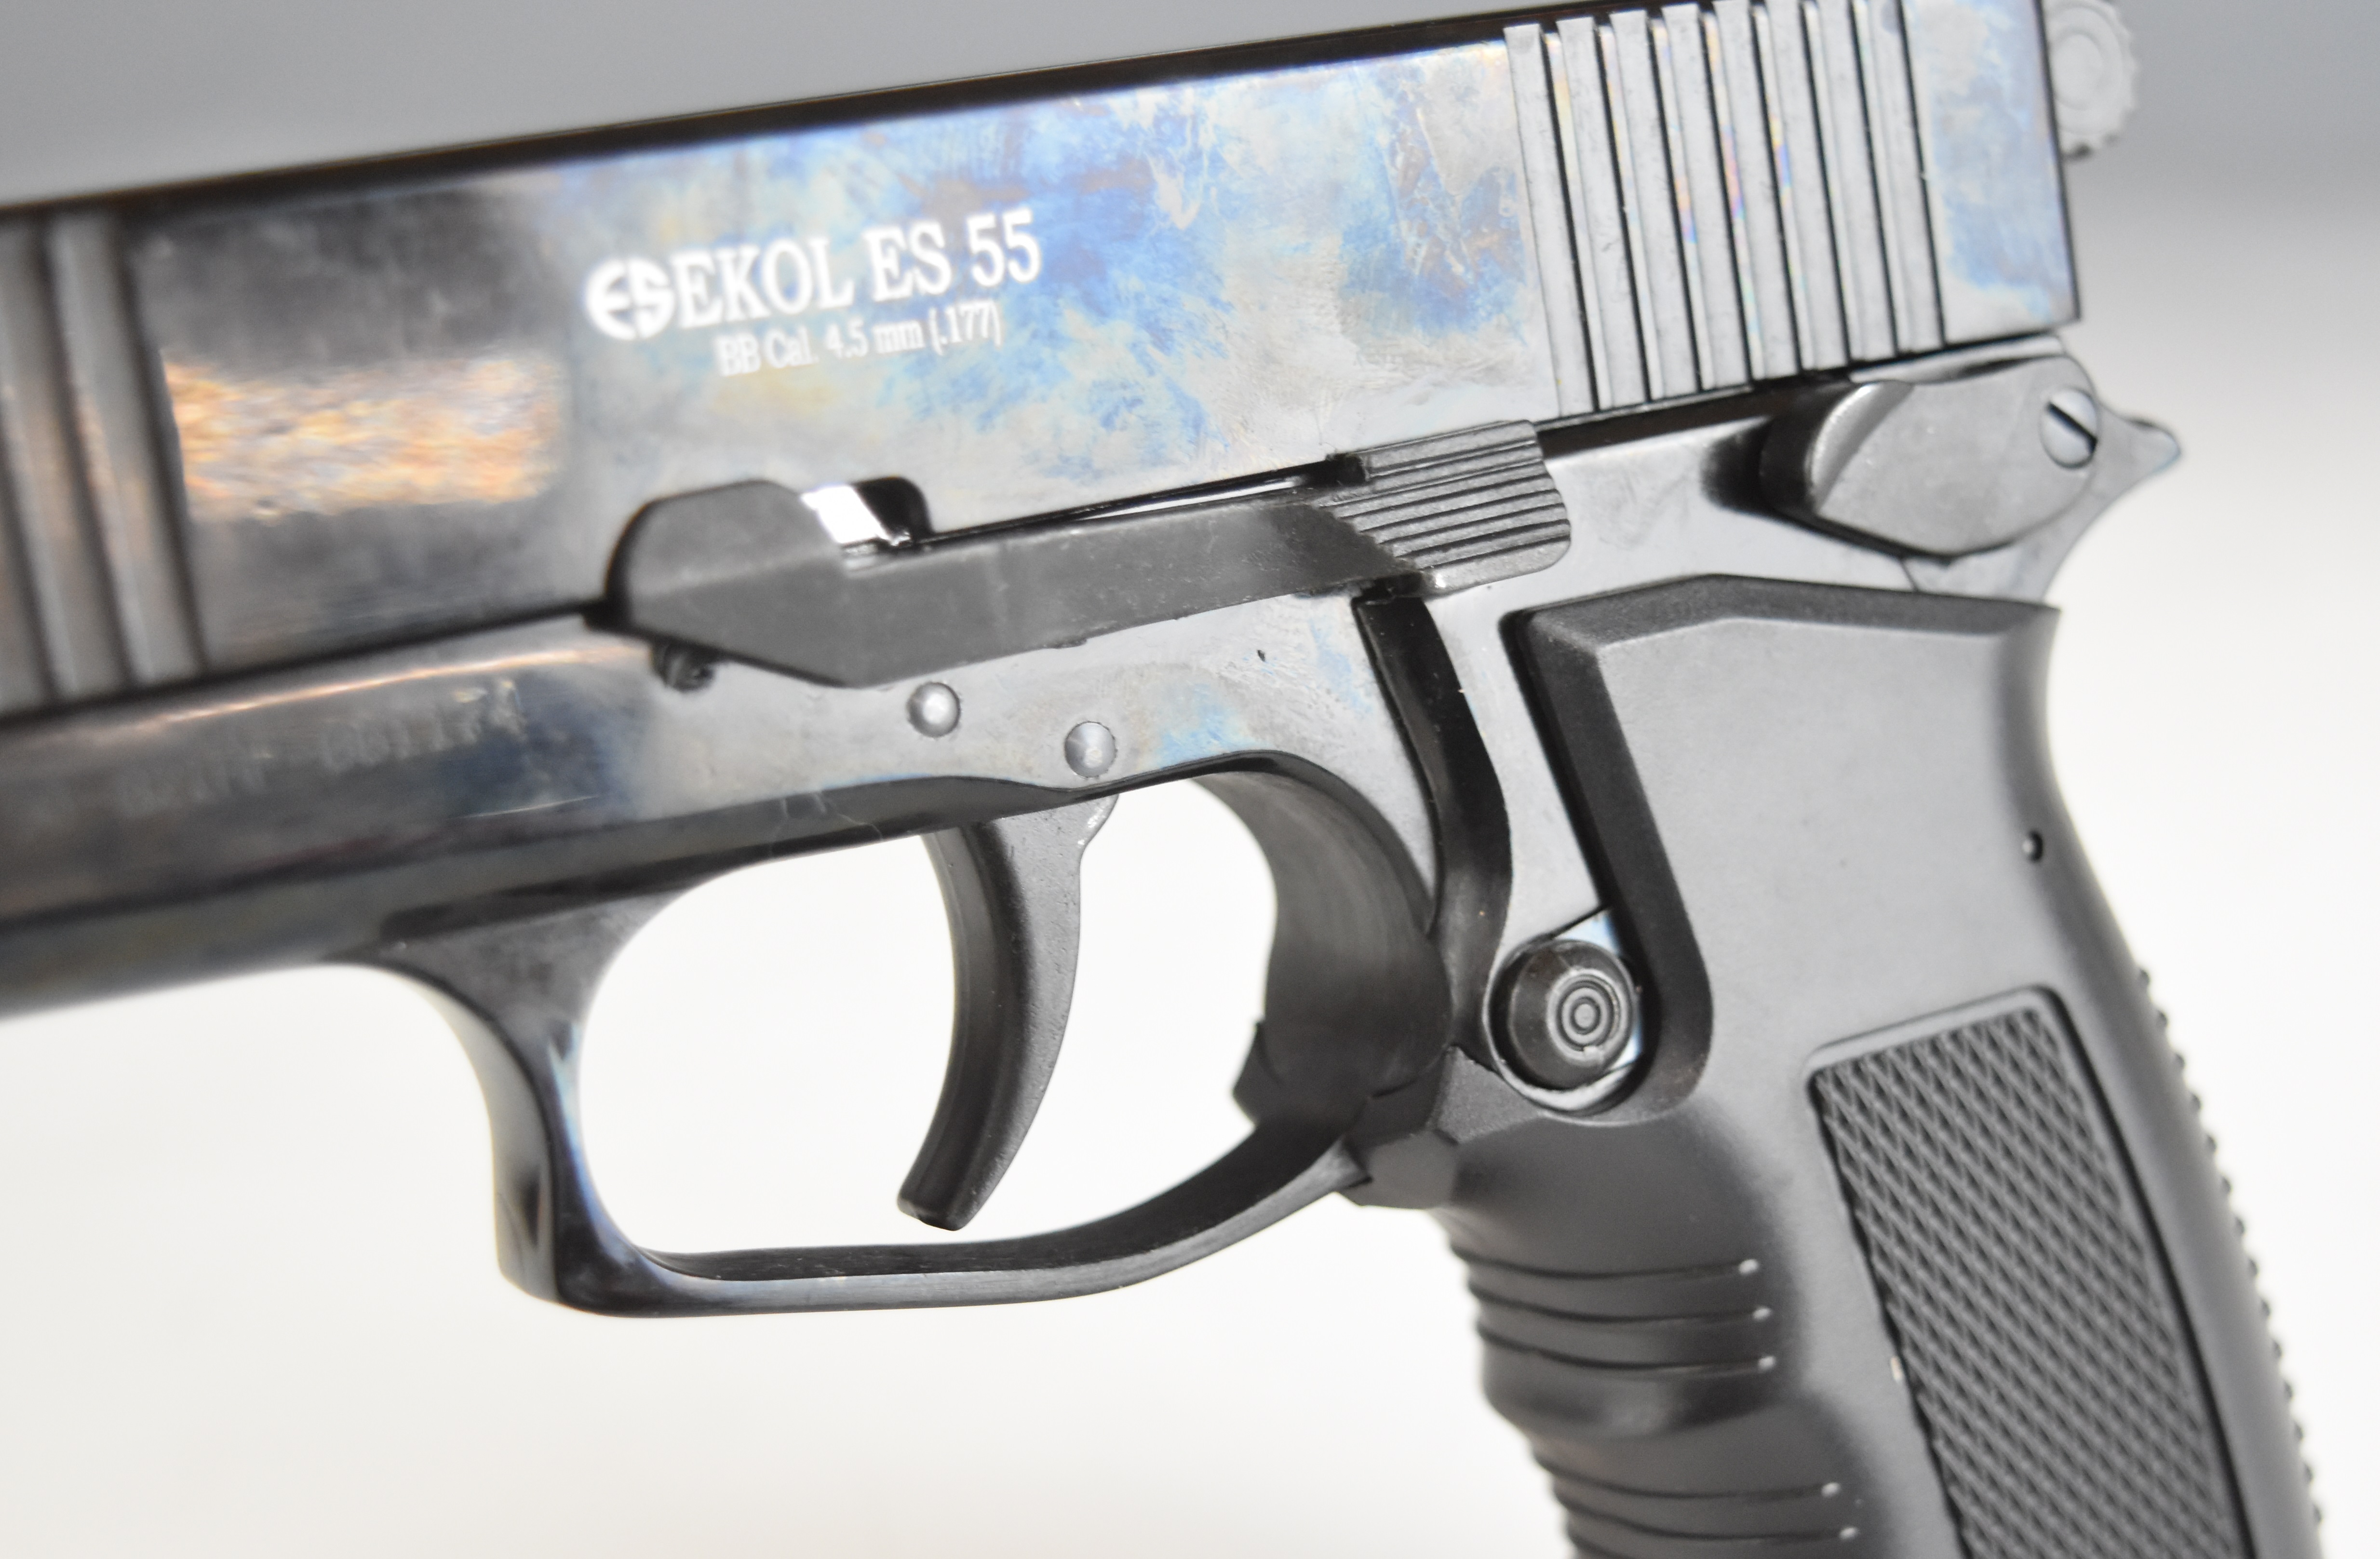 Ekol ES 55 .177 CO2 air pistol with chequered composite grips and fixed sights, serial number 90- - Image 7 of 15